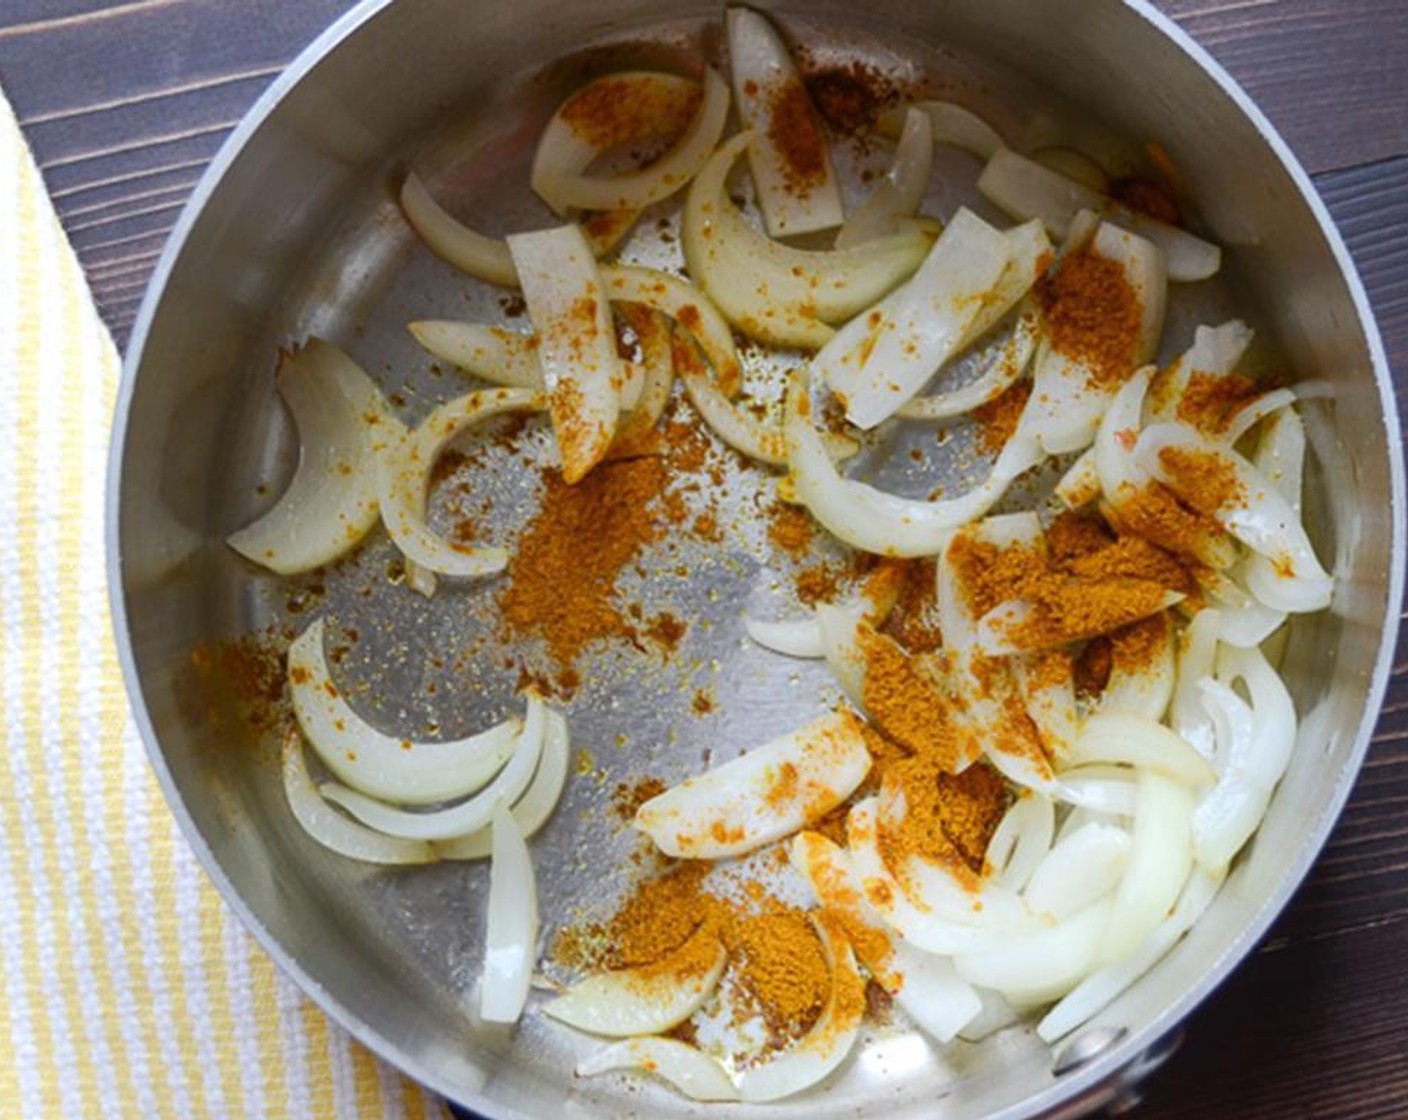 step 3 In a medium saucepan, heat the Olive Oil (1 Tbsp) over medium heat. Add the Onion (1) and sprinkle with Salt (1/4 tsp). Cook the onions for 3 to 4 minutes until they start to soften. Sprinkle in the Curry Powder (1 tsp).